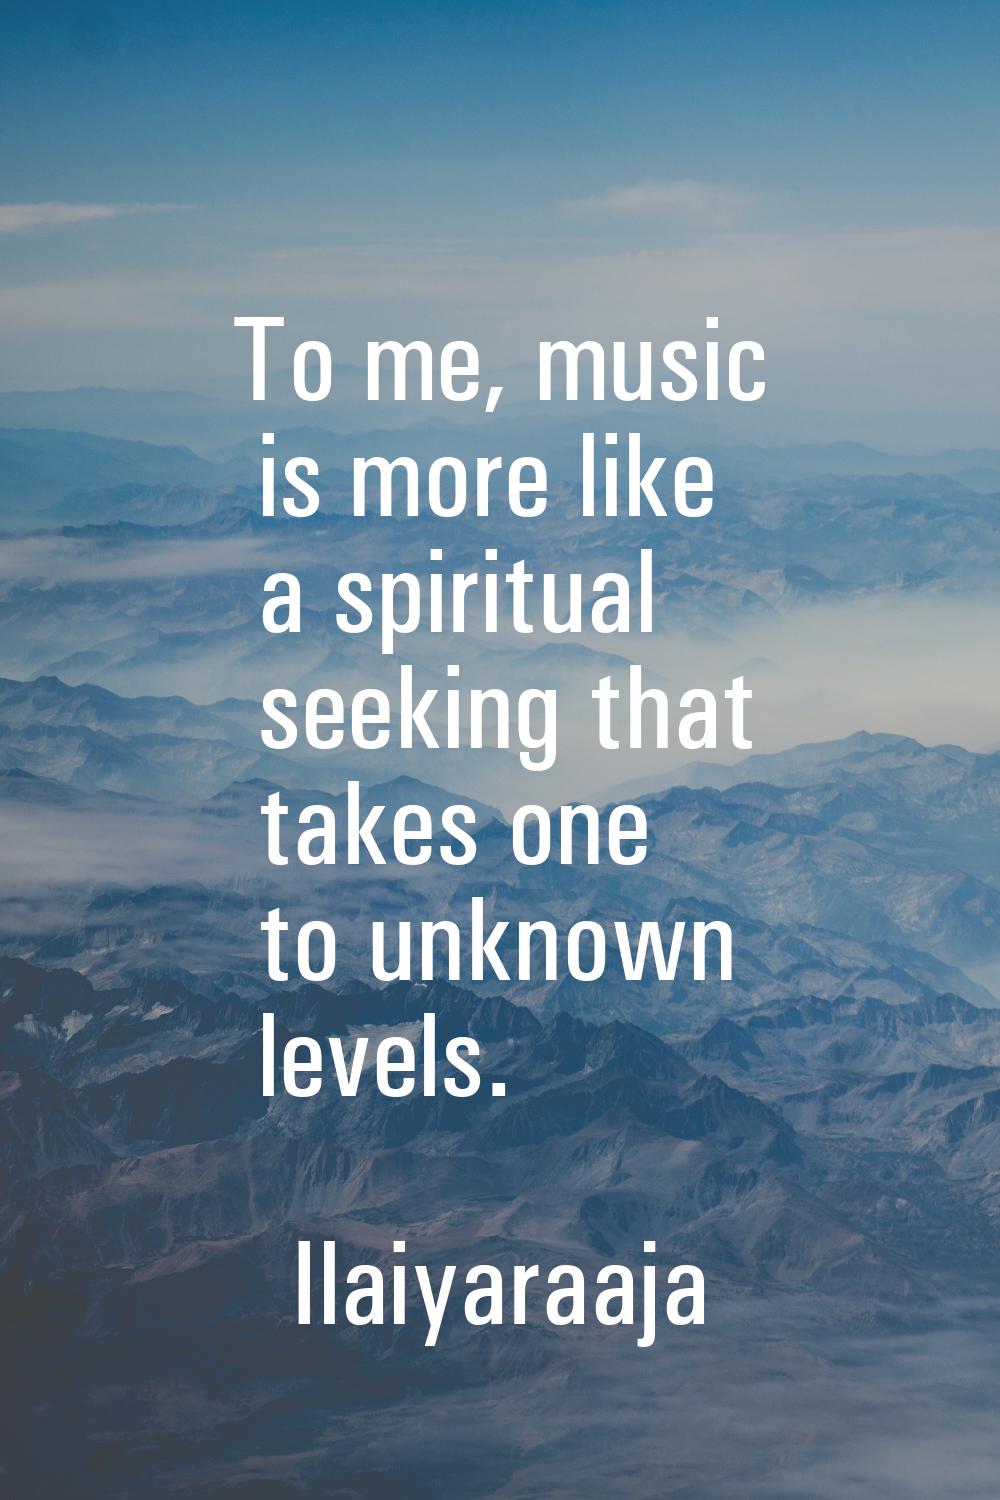 To me, music is more like a spiritual seeking that takes one to unknown levels.